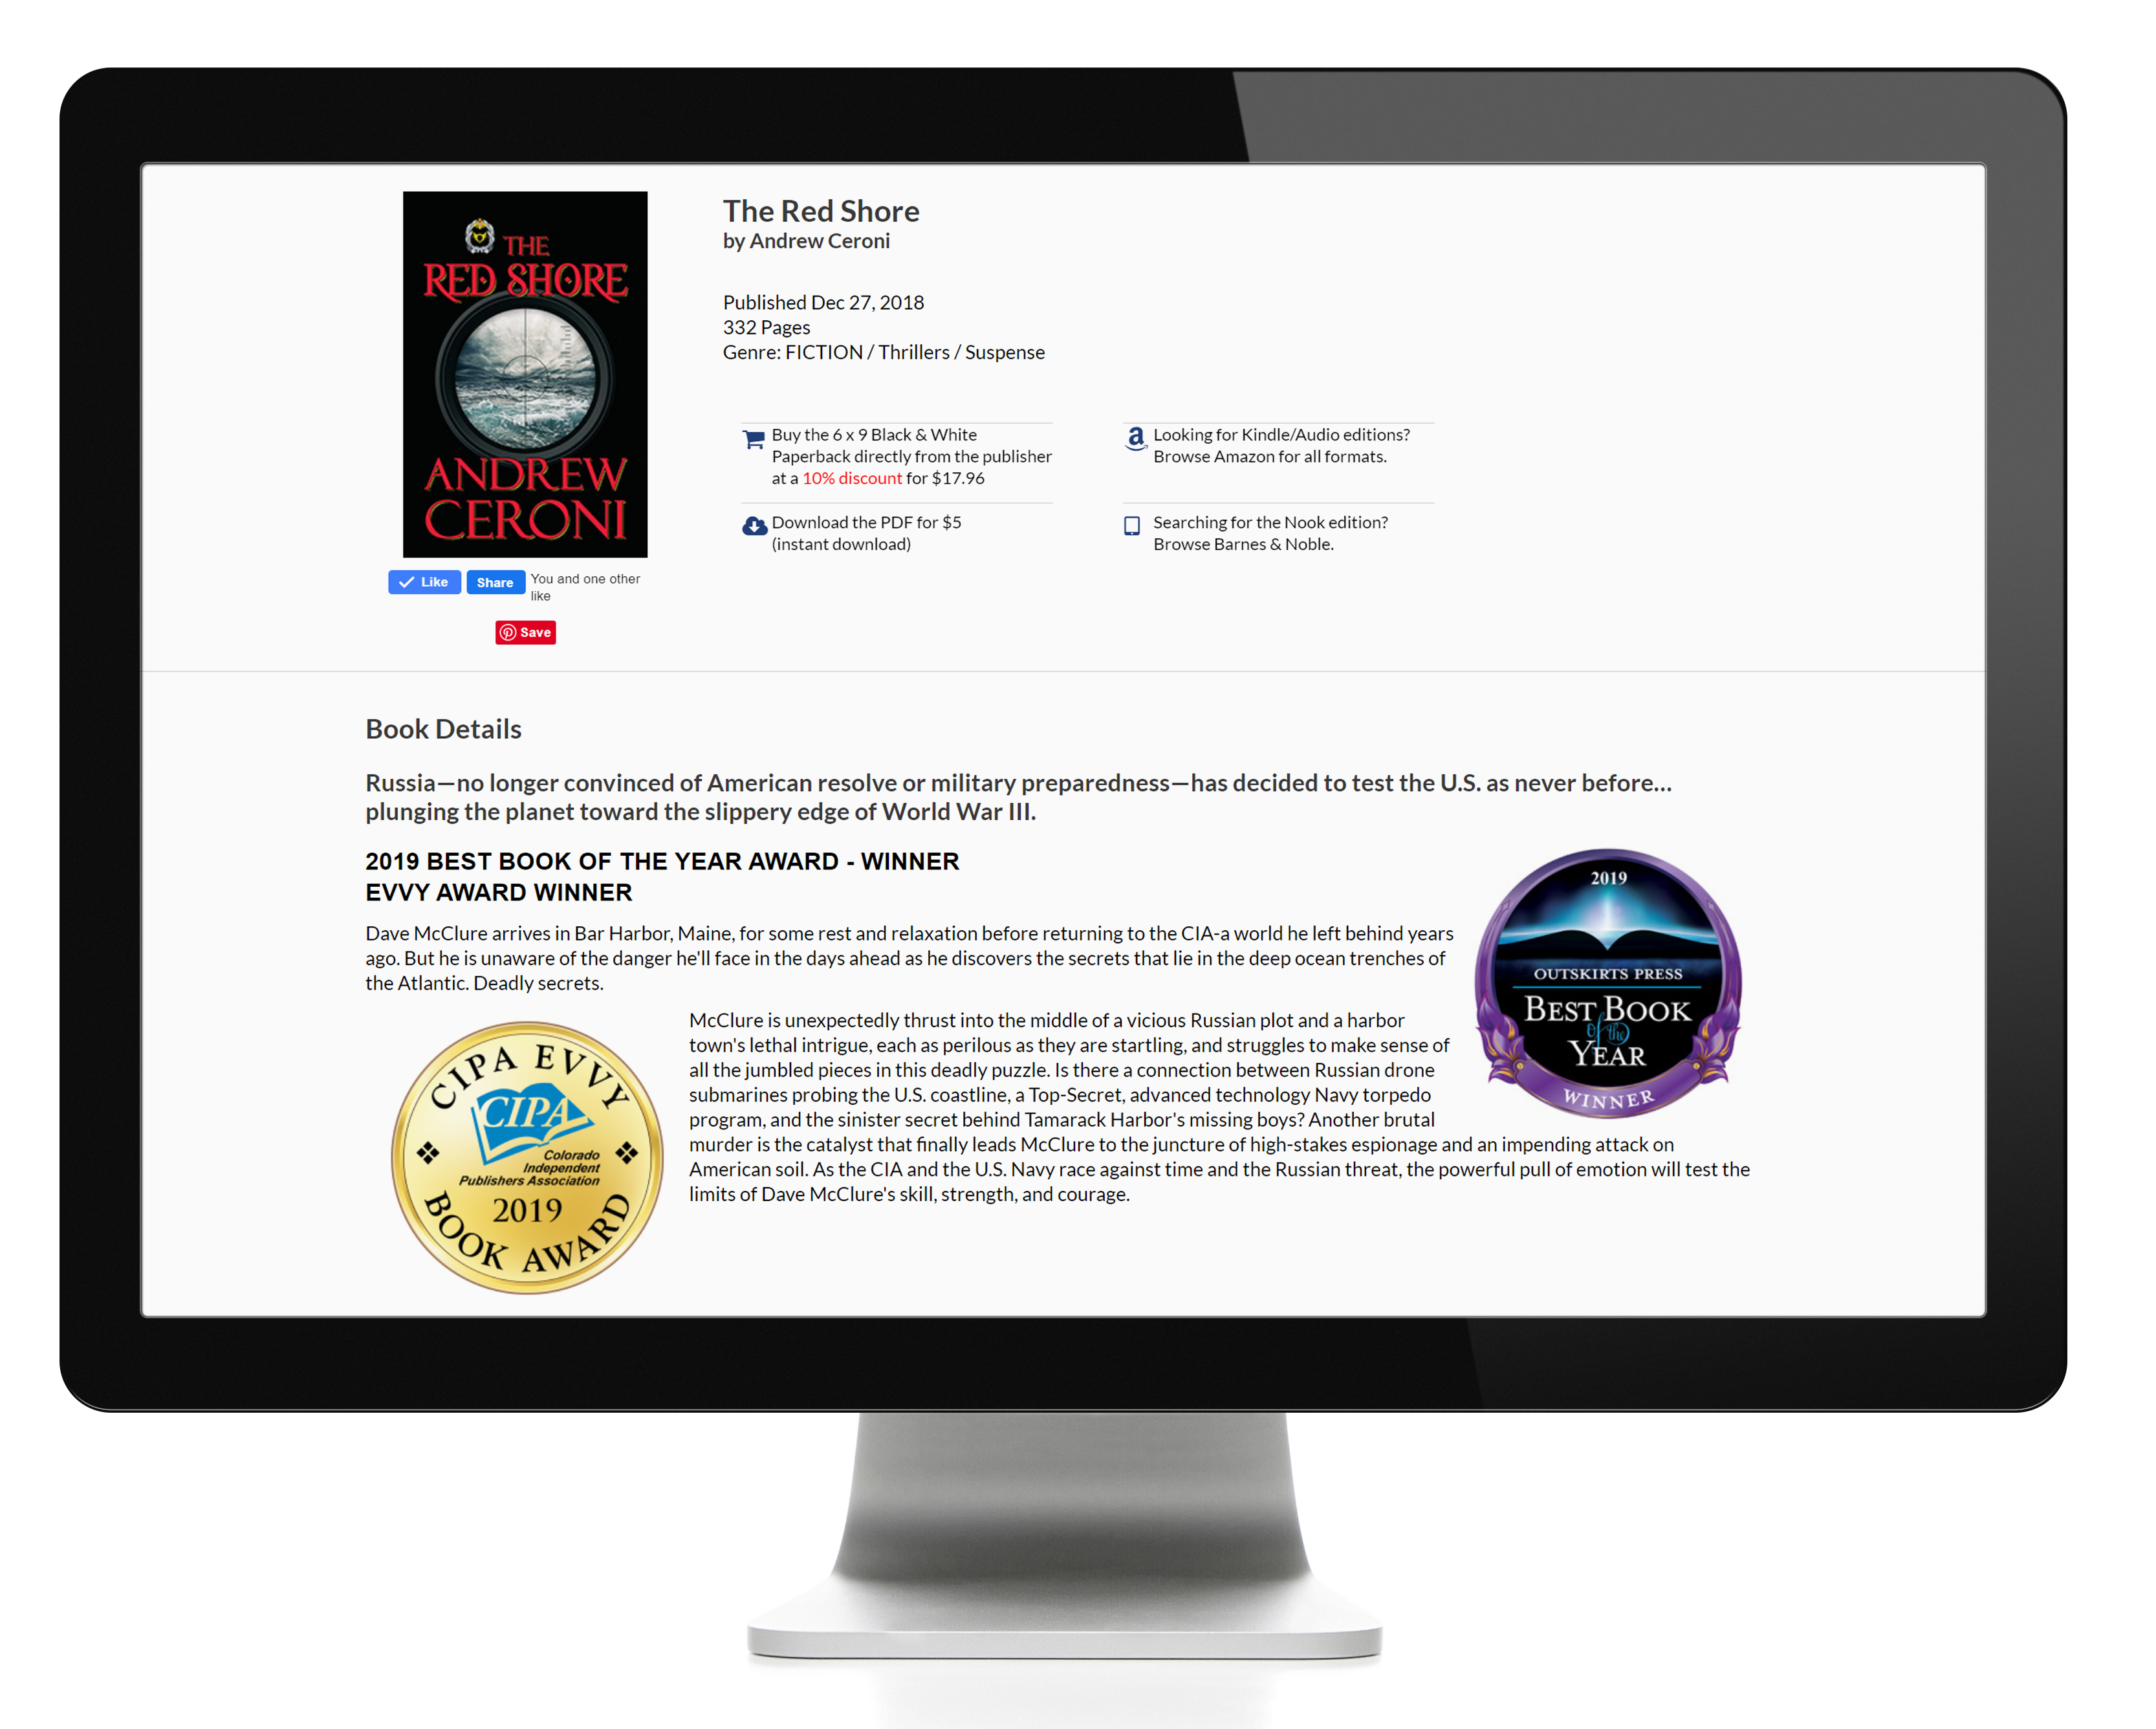 Put your book award seal on your book's Outskirts Press bookstore webpage to increase book sales.